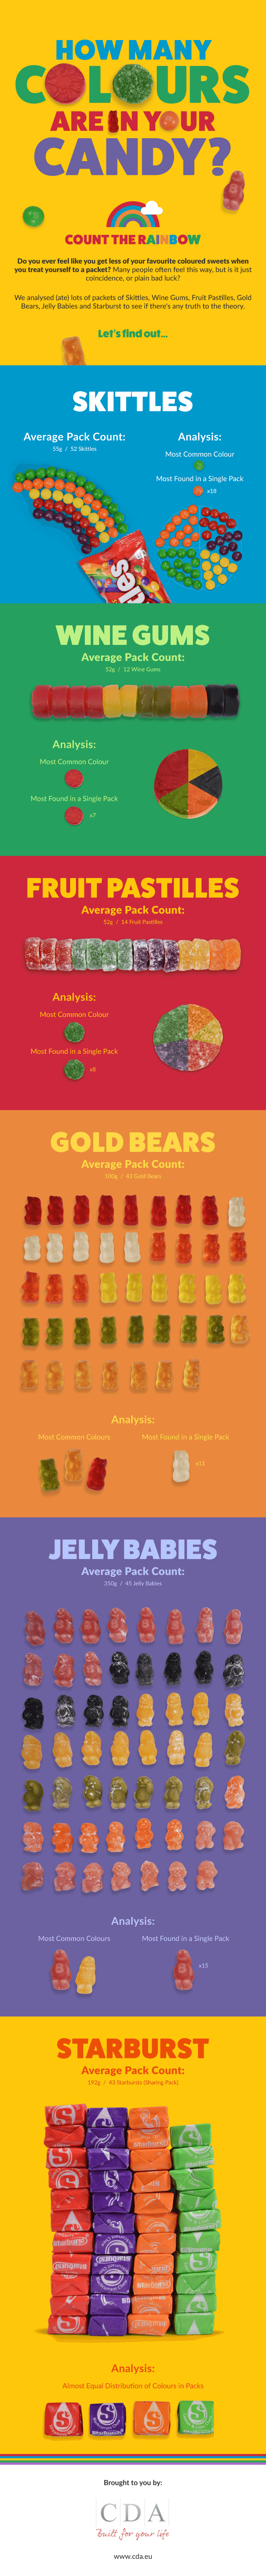 how-many-coloured-sweets-in-a-bag